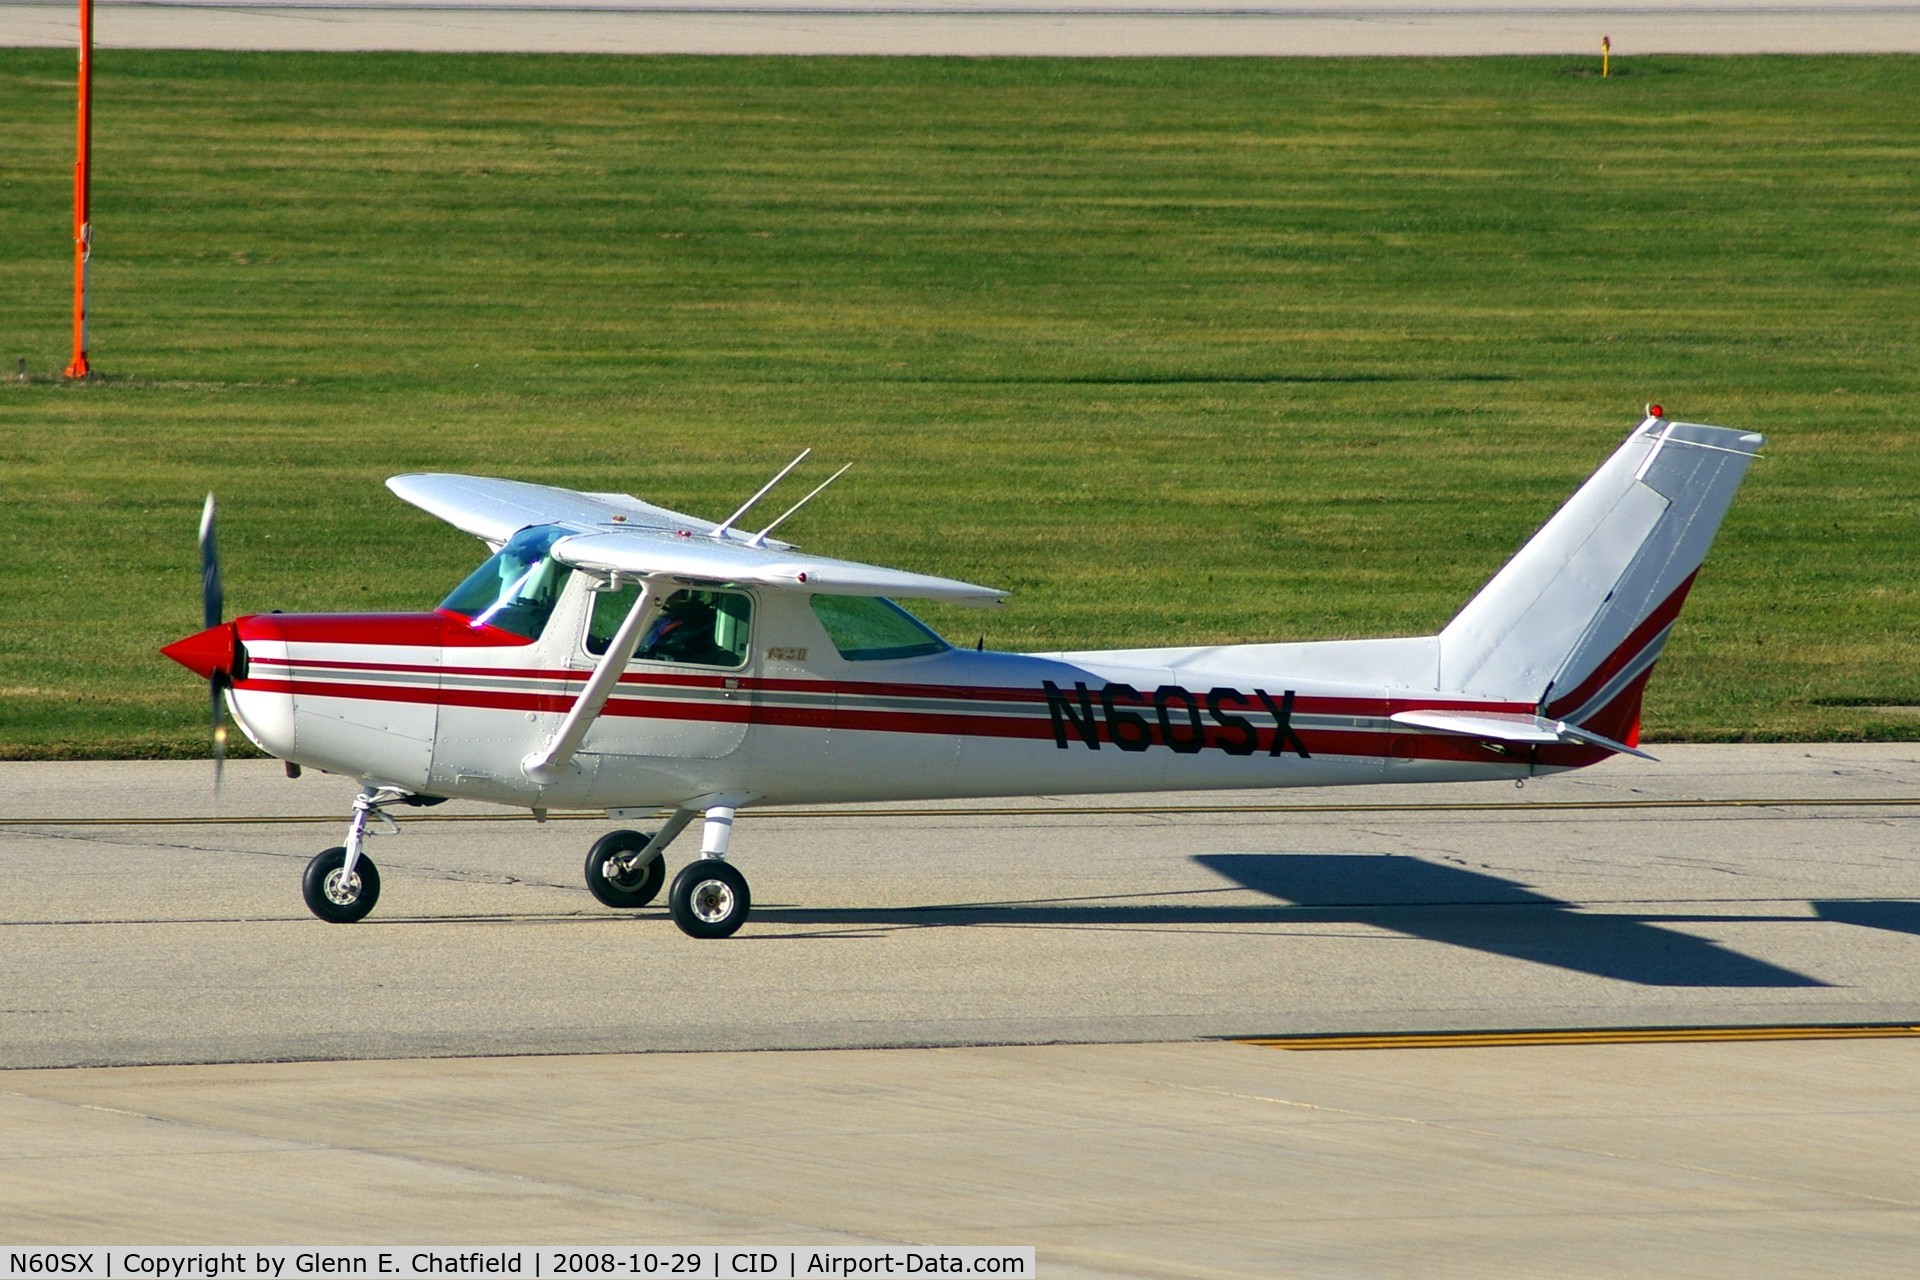 N60SX, 1981 Cessna 152 C/N 15285148, Taxiing past my window on the way to Runway 27